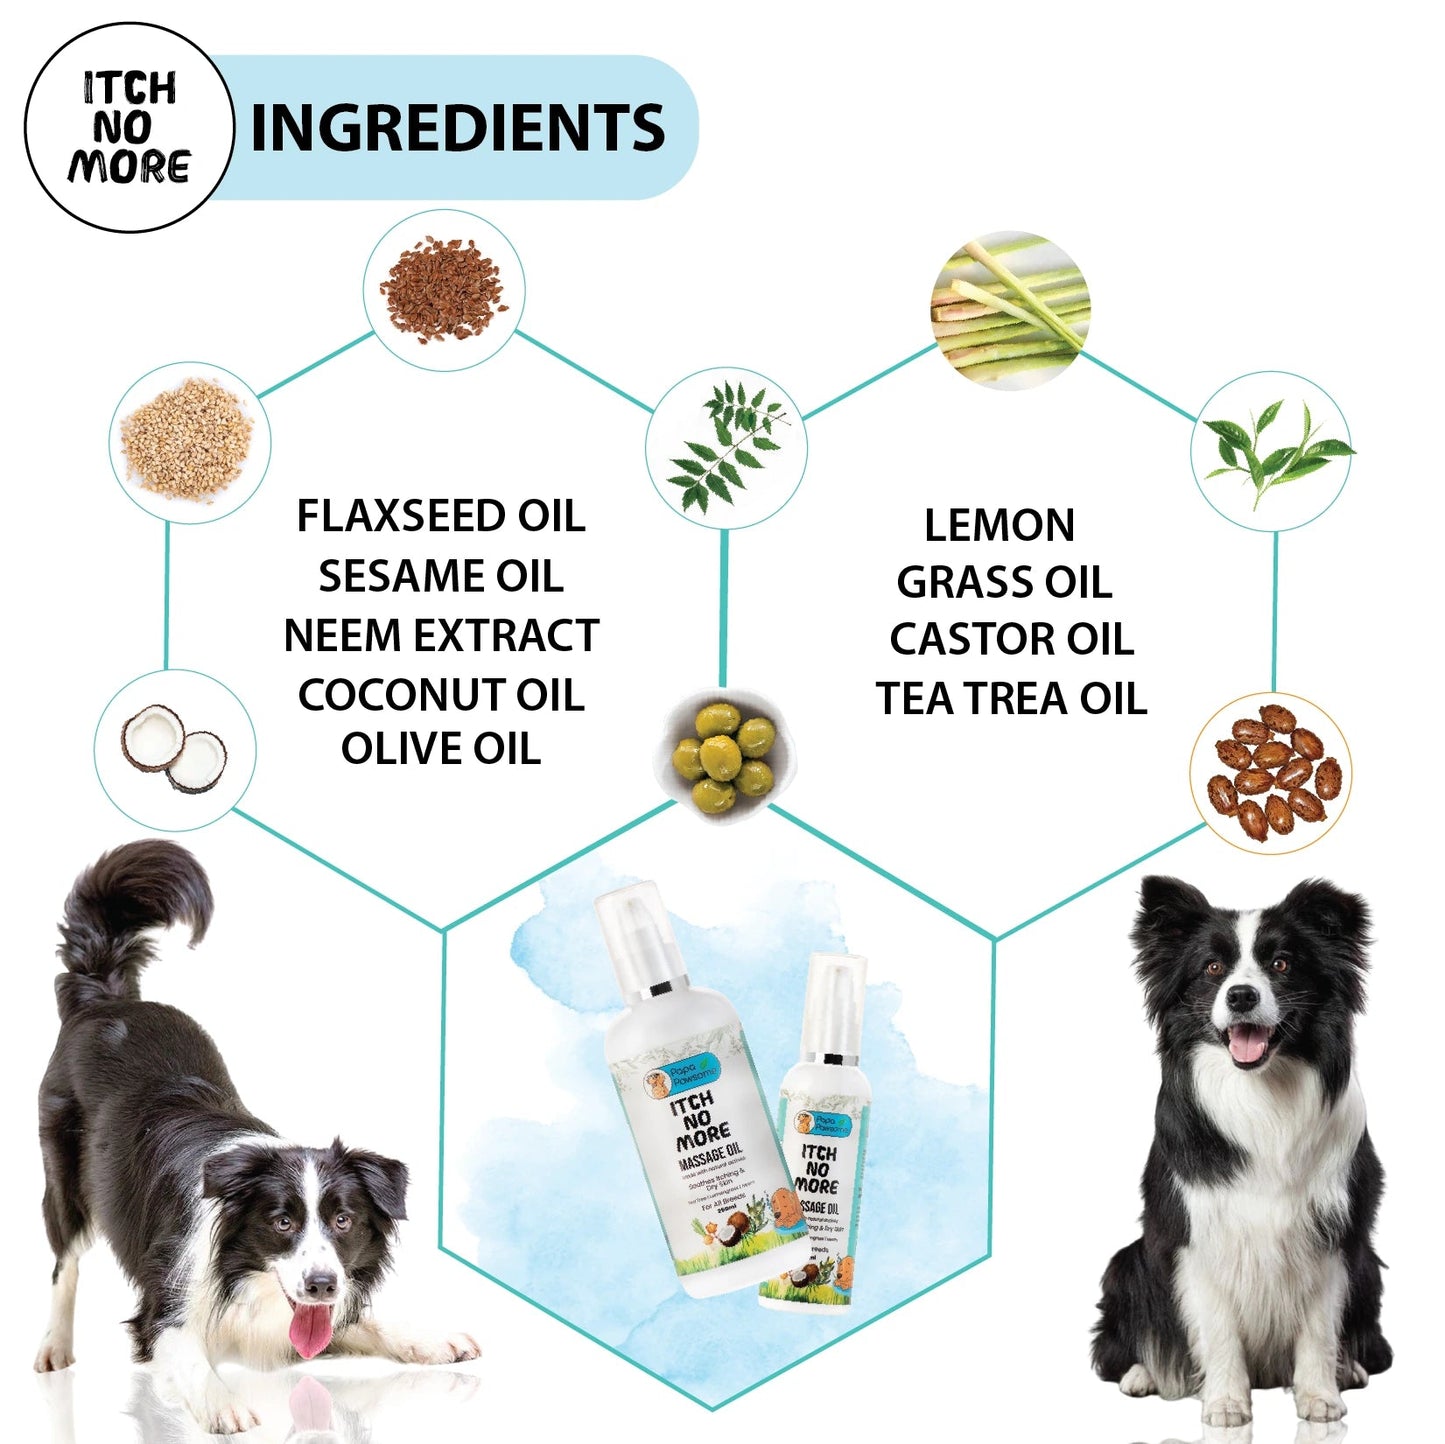 Close-up view of pet oil ingredients: Flaxseed Oil, Neem Supercritical Extracts, Olive Oil, Sesame Oil, Castor Oil, Coconut Oil, Tea Tree Essential Oil, Lemongrass Essential Oil.